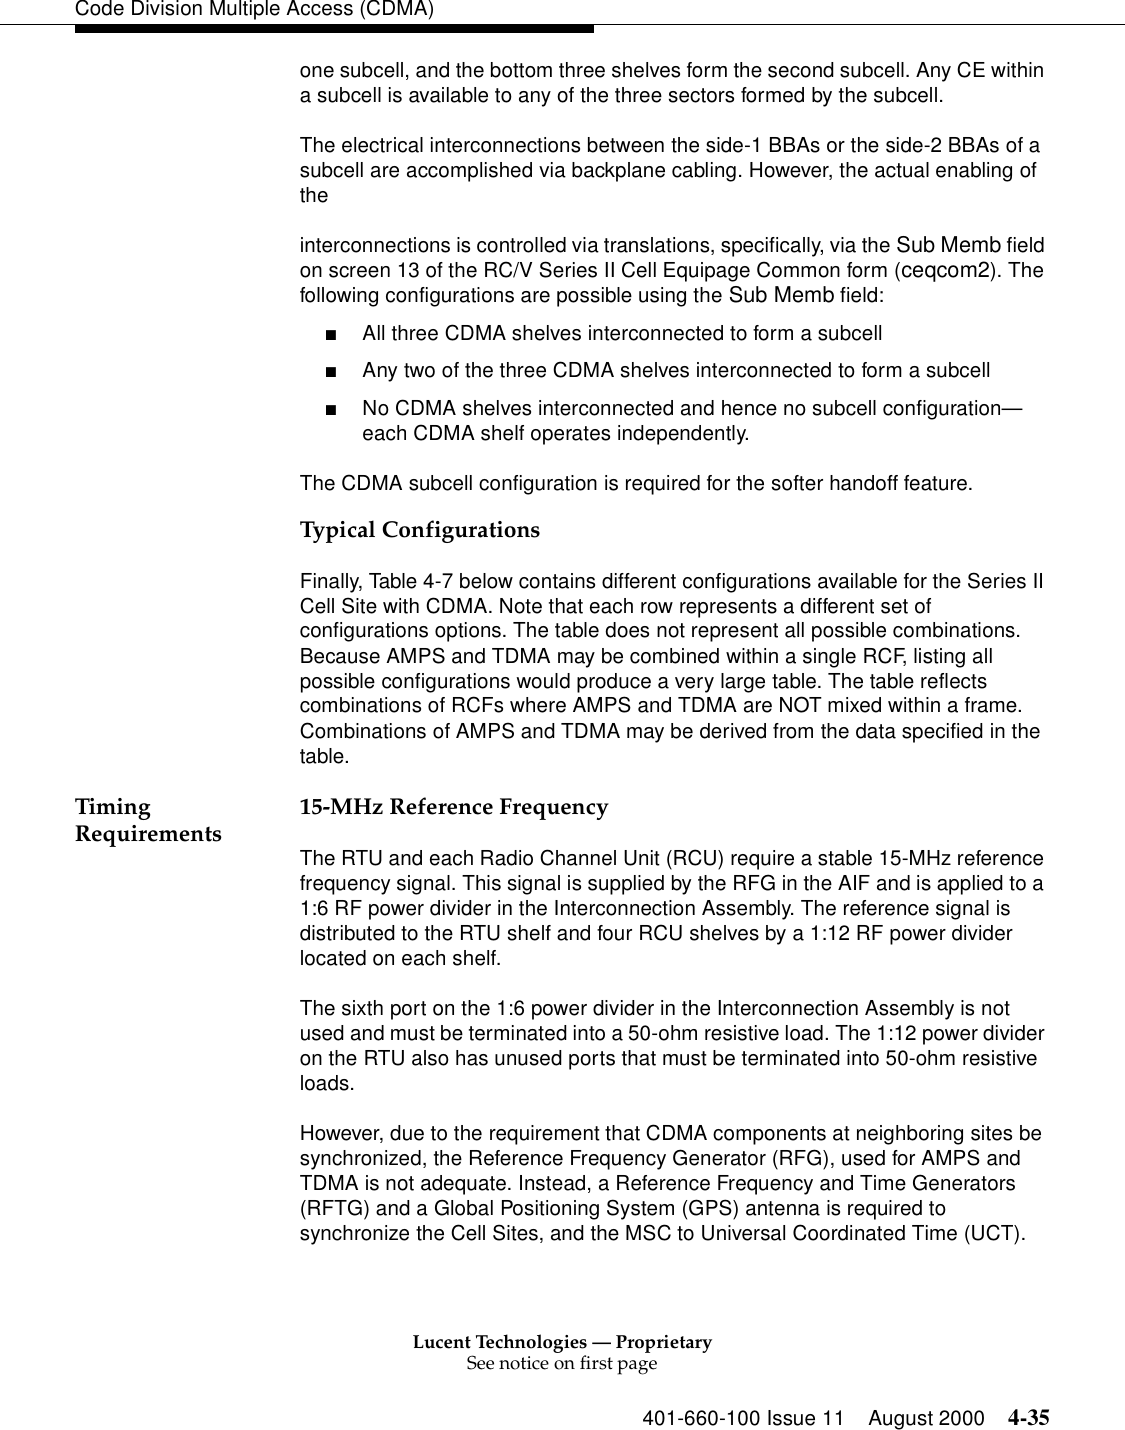 Lucent Technologies — ProprietarySee notice on first page401-660-100 Issue 11 August 2000 4-35Code Division Multiple Access (CDMA)one subcell, and the bottom three shelves form the second subcell. Any CE within a subcell is available to any of the three sectors formed by the subcell. The electrical interconnections between the side-1 BBAs or the side-2 BBAs of a subcell are accomplished via backplane cabling. However, the actual enabling of the interconnections is controlled via translations, specifically, via the Sub Memb field on screen 13 of the RC/V Series II Cell Equipage Common form (ceqcom2). The following configurations are possible using the Sub Memb field:■All three CDMA shelves interconnected to form a subcell■Any two of the three CDMA shelves interconnected to form a subcell■No CDMA shelves interconnected and hence no subcell configuration—each CDMA shelf operates independently.The CDMA subcell configuration is required for the softer handoff feature.Typical ConfigurationsFinally, Table 4-7 below contains different configurations available for the Series II Cell Site with CDMA. Note that each row represents a different set of configurations options. The table does not represent all possible combinations. Because AMPS and TDMA may be combined within a single RCF, listing all possible configurations would produce a very large table. The table reflects combinations of RCFs where AMPS and TDMA are NOT mixed within a frame. Combinations of AMPS and TDMA may be derived from the data specified in the table. Timing Requirements 15-MHz Reference FrequencyThe RTU and each Radio Channel Unit (RCU) require a stable 15-MHz reference frequency signal. This signal is supplied by the RFG in the AIF and is applied to a 1:6 RF power divider in the Interconnection Assembly. The reference signal is distributed to the RTU shelf and four RCU shelves by a 1:12 RF power divider located on each shelf. The sixth port on the 1:6 power divider in the Interconnection Assembly is not used and must be terminated into a 50-ohm resistive load. The 1:12 power divider on the RTU also has unused ports that must be terminated into 50-ohm resistive loads. However, due to the requirement that CDMA components at neighboring sites be synchronized, the Reference Frequency Generator (RFG), used for AMPS and TDMA is not adequate. Instead, a Reference Frequency and Time Generators (RFTG) and a Global Positioning System (GPS) antenna is required to synchronize the Cell Sites, and the MSC to Universal Coordinated Time (UCT).